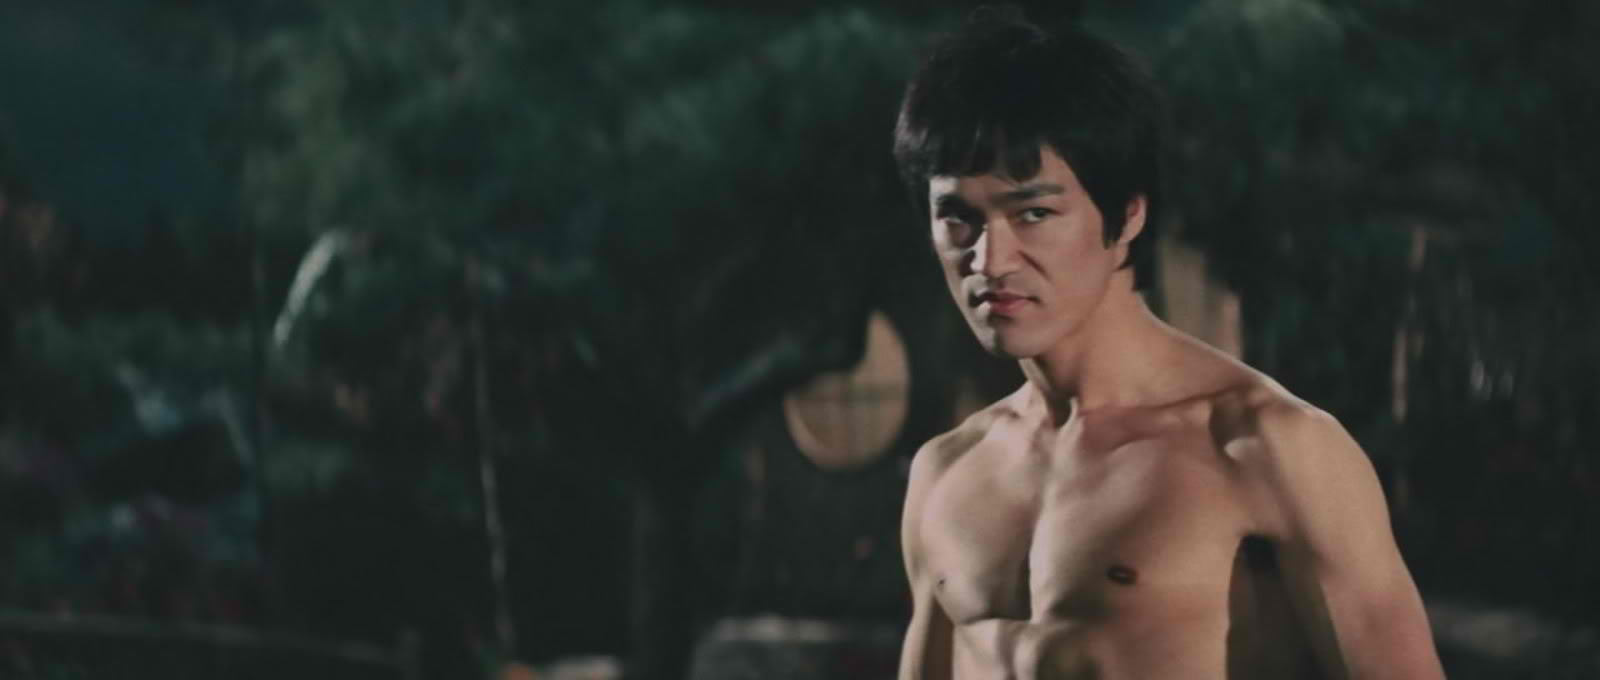 Bruce Lee images Fist of Fury HD wallpaper and background photos